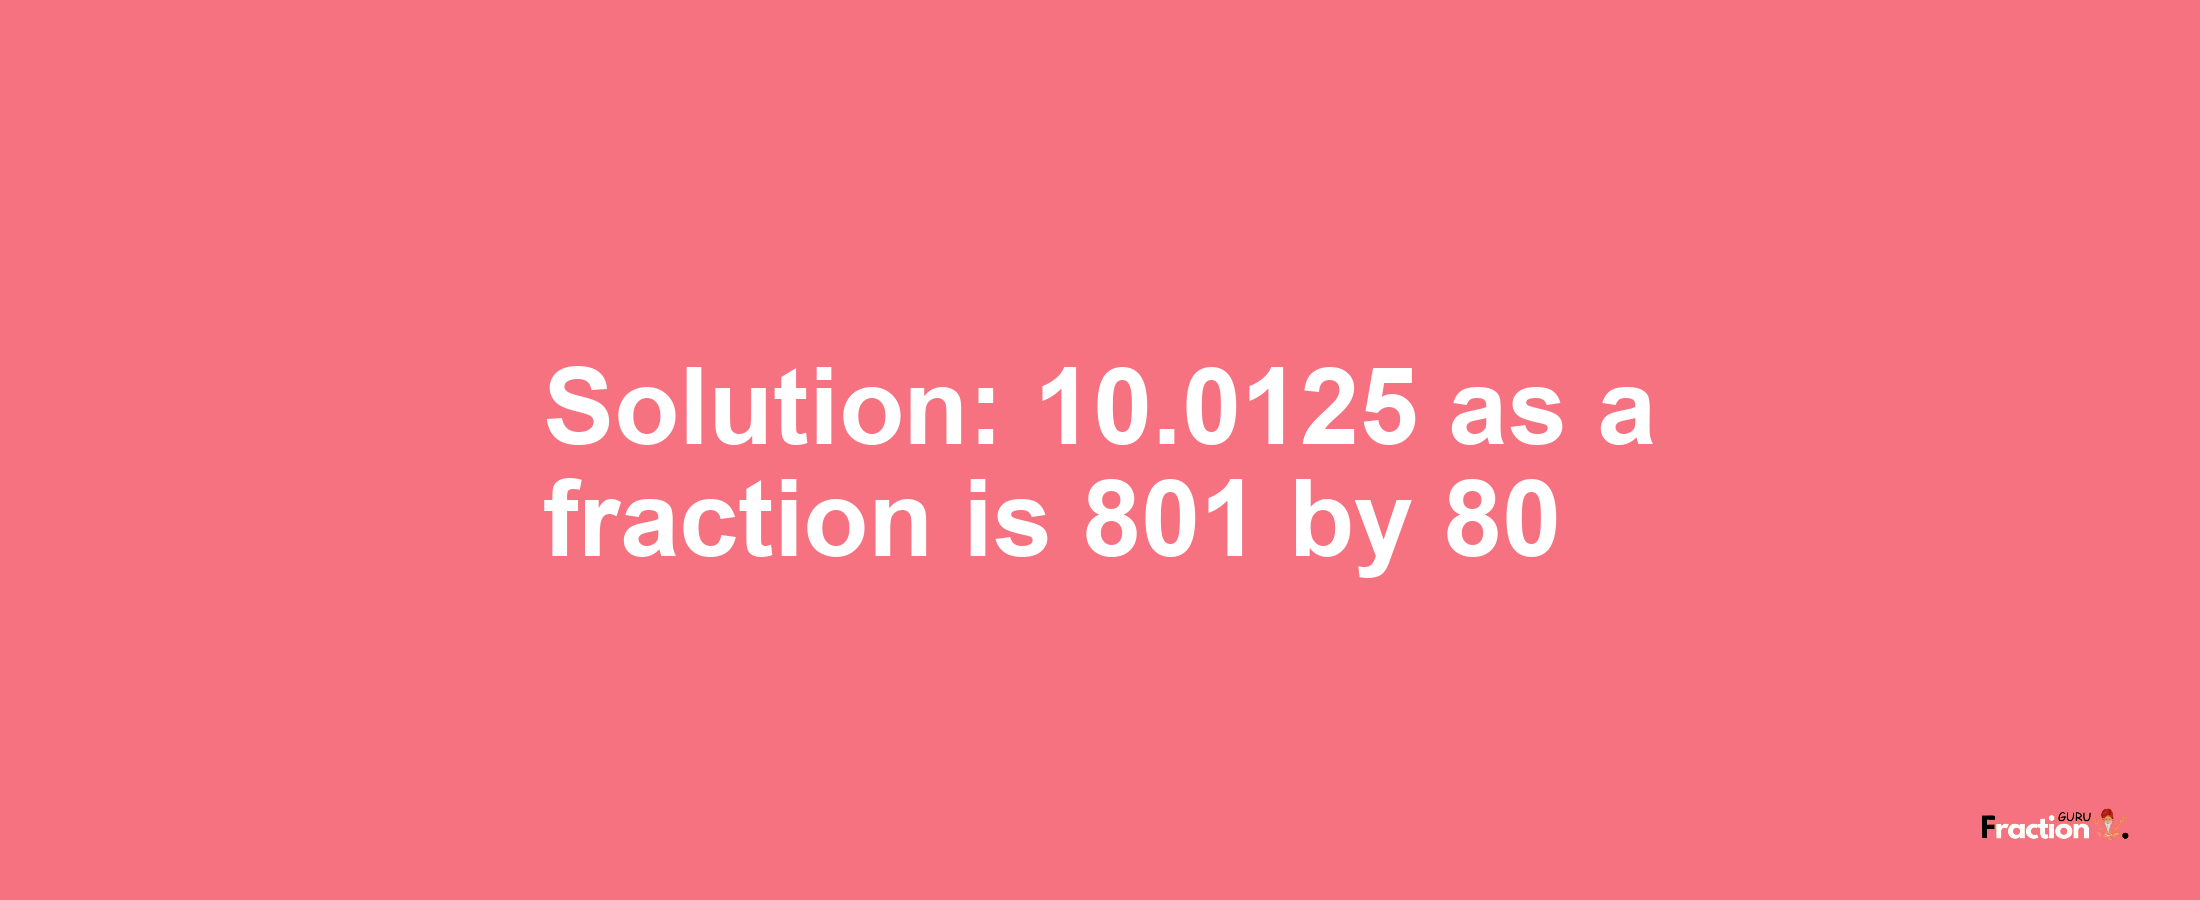 Solution:10.0125 as a fraction is 801/80